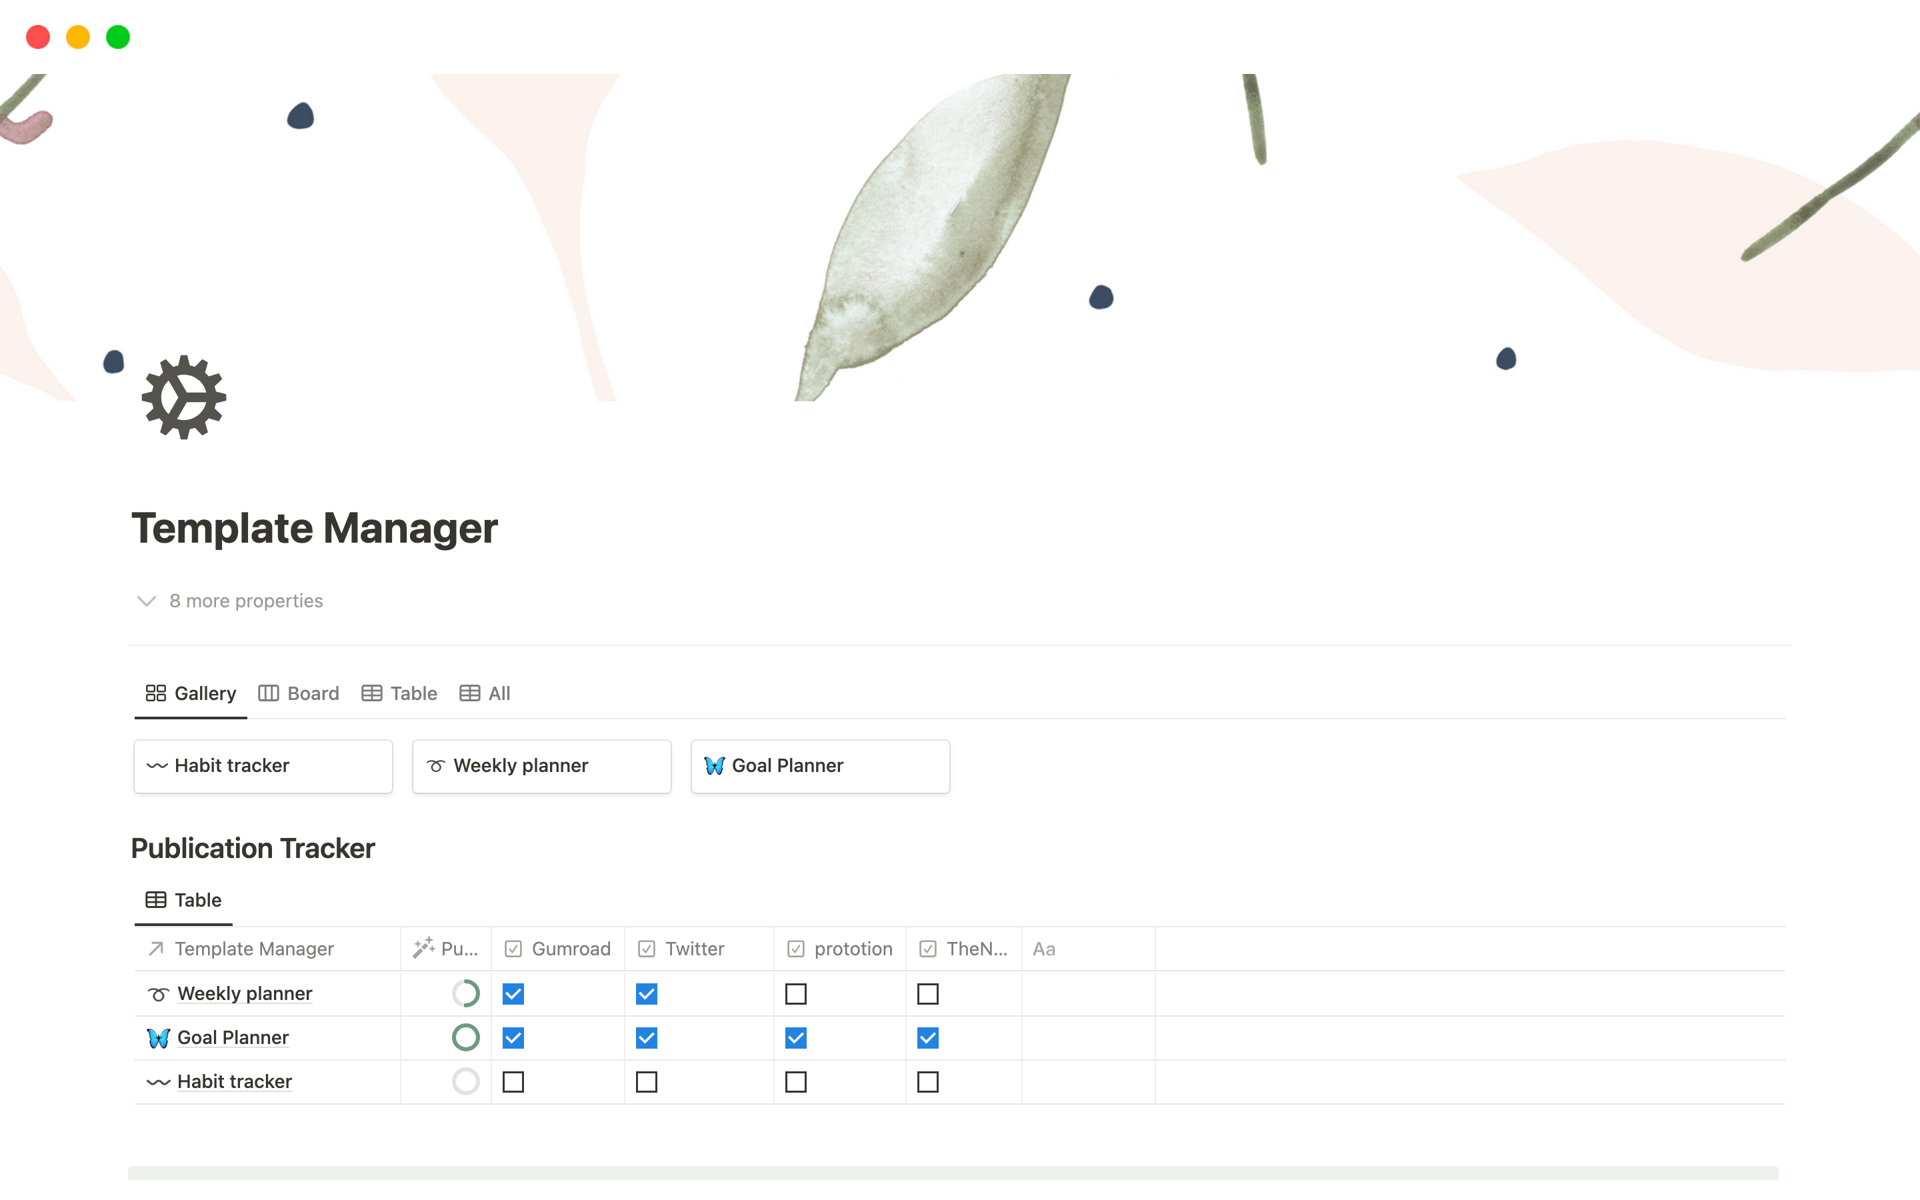 The Template Manager for Notion Creators is a comprehensive tool designed to help Notion users and template creators organize and easily access their templates, with features like categorization, tagging, filtering, a publication tracker, and more.